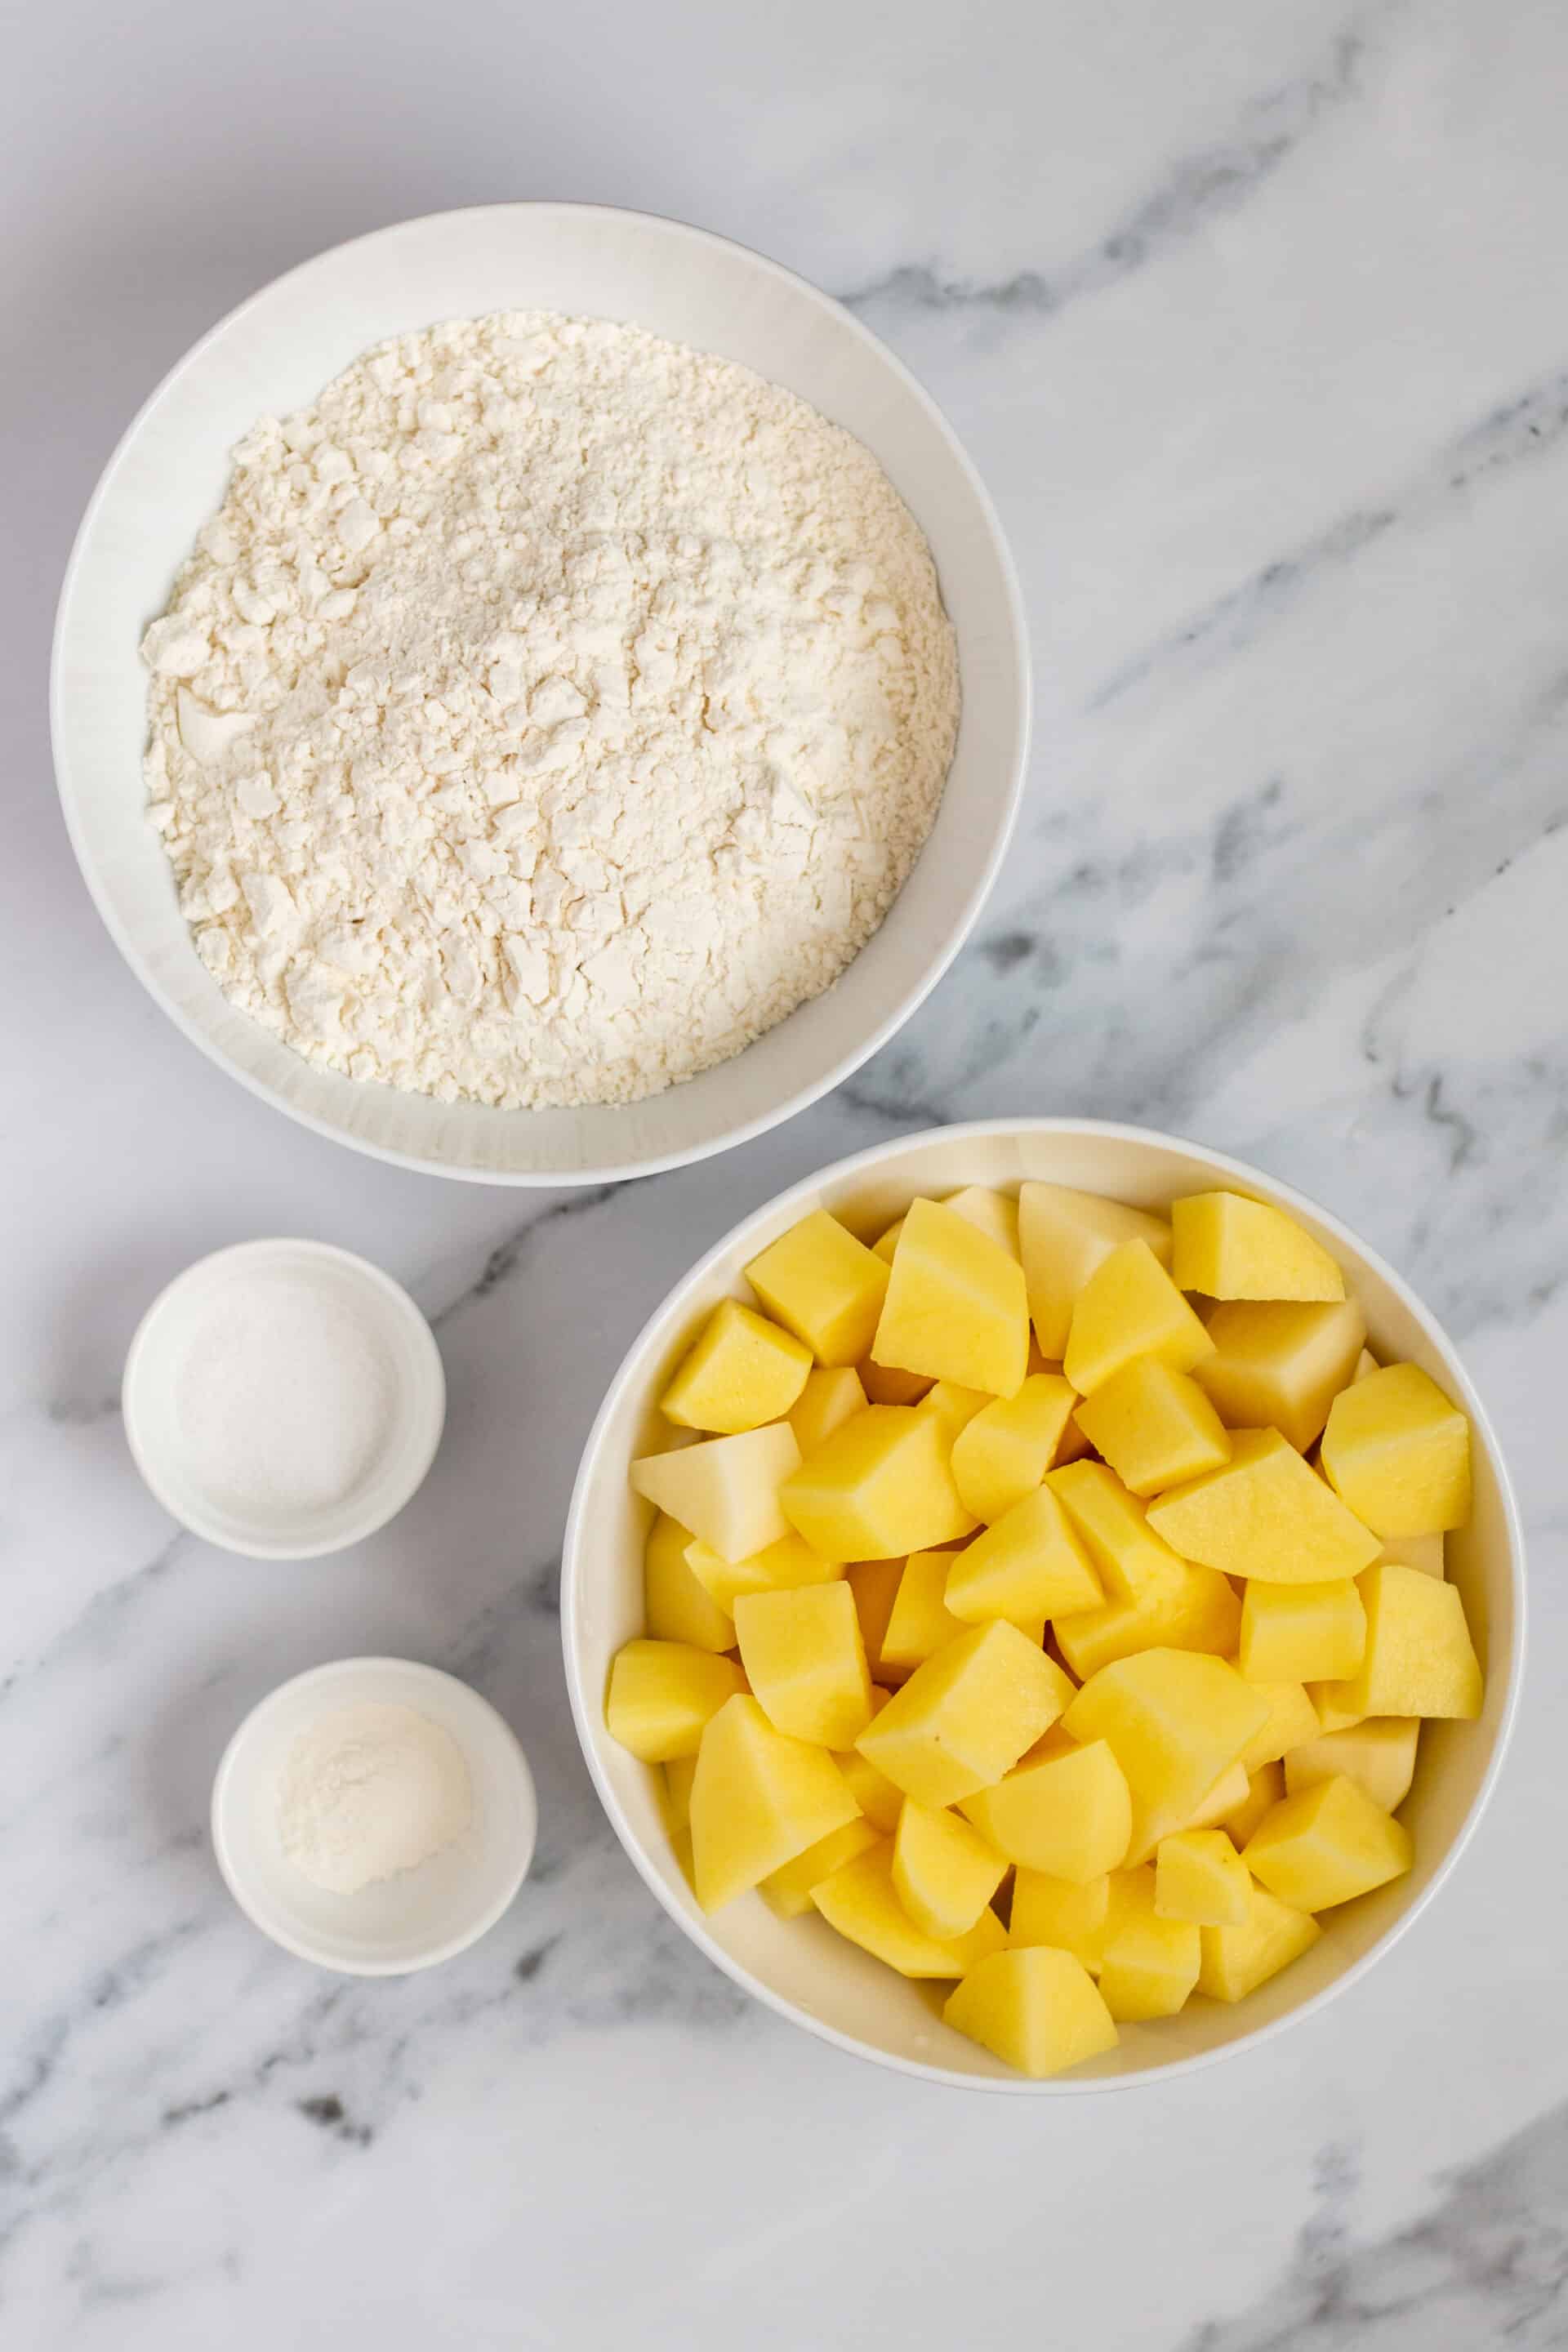 the simple ingredients needed to make gluten free gnocchi